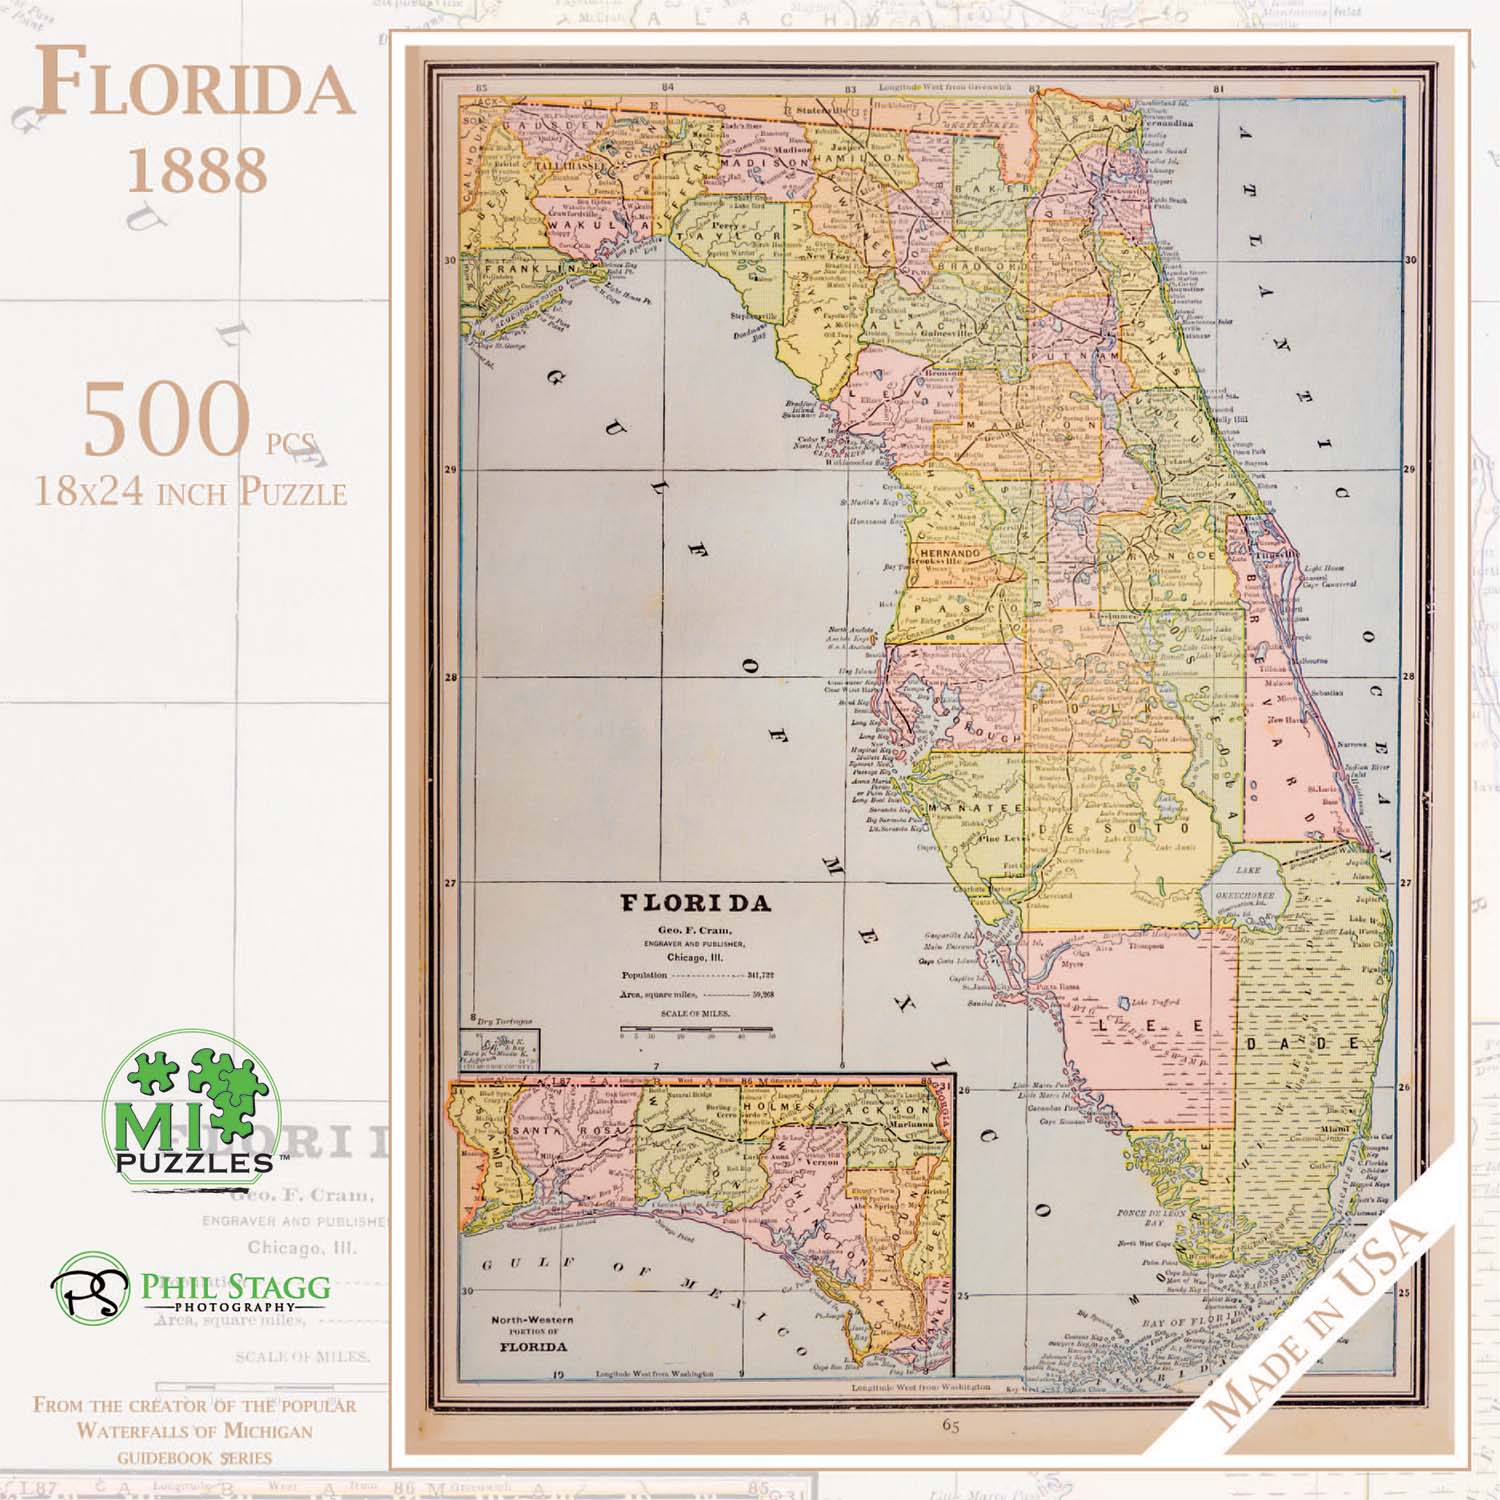 Florida 1888 Maps & Geography Jigsaw Puzzle